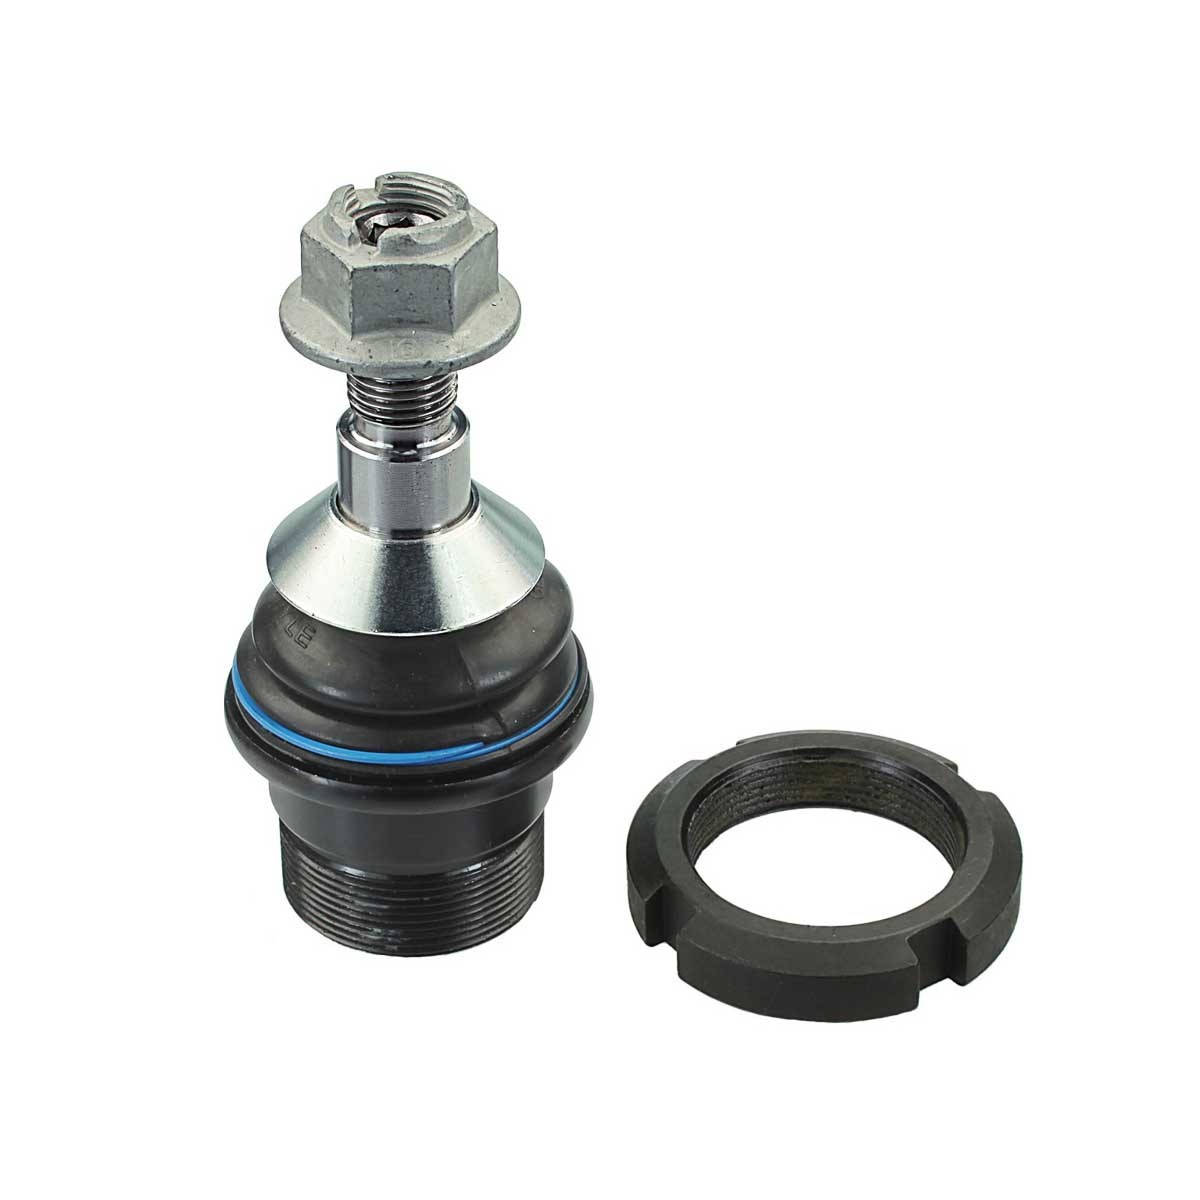 MBJ0153 MEYLE -ORIGINAL Quality Lower, Front Axle Left, Front Axle Right, with accessories, 47mm, 100mm, for control arm Thread Size: M16x1,5 Suspension ball joint 30-16 010 0016 buy